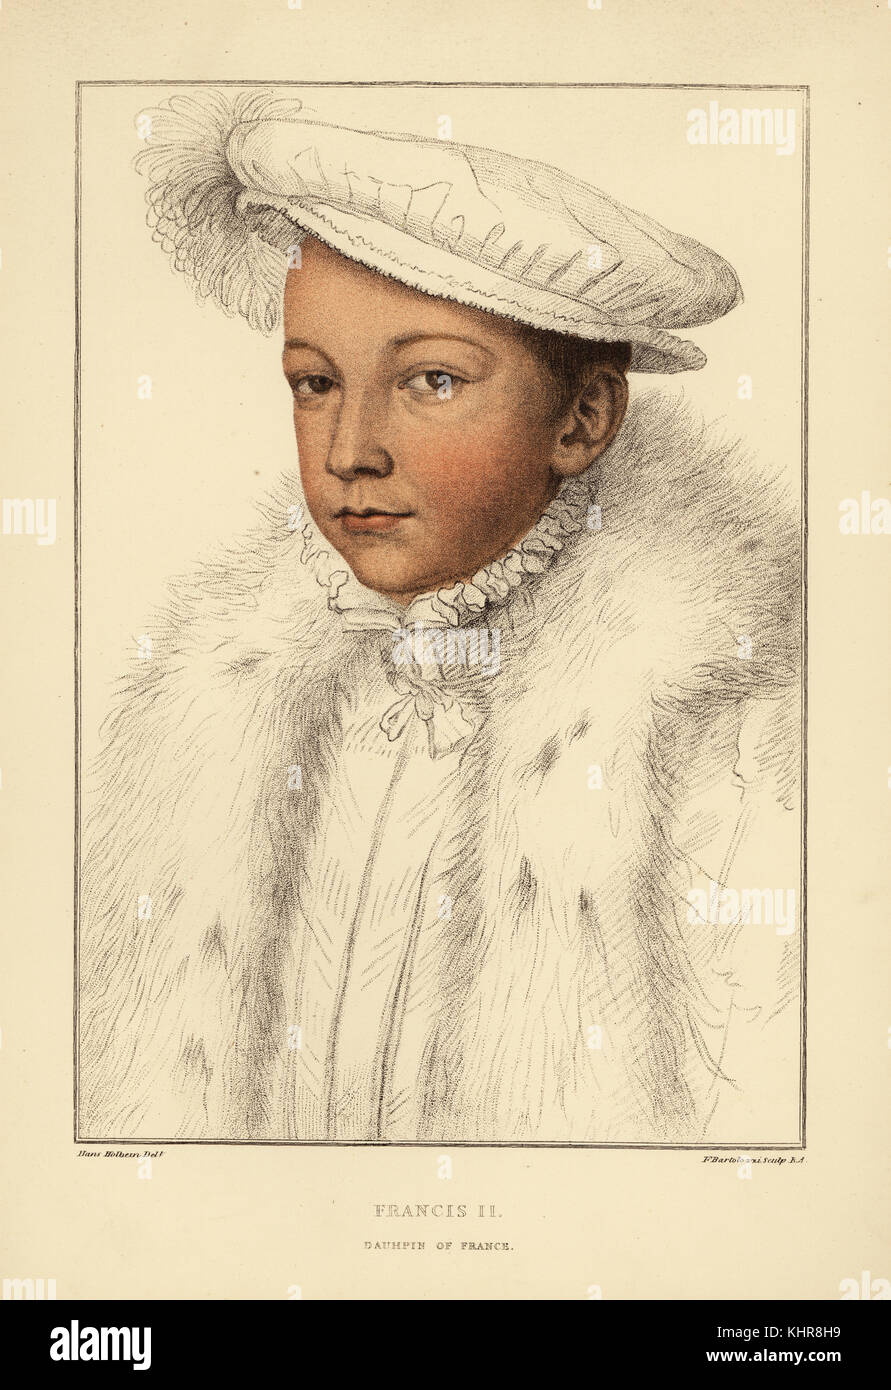 King Francis II of France as dauphin, King consort of Scotland, 1544-1560. Handcoloured copperplate engraving by Francis Bartolozzi after Hans Holbein from Facsimiles of Original Drawings by Hans Holbein, Hamilton, Adams, London, 1884. Stock Photo